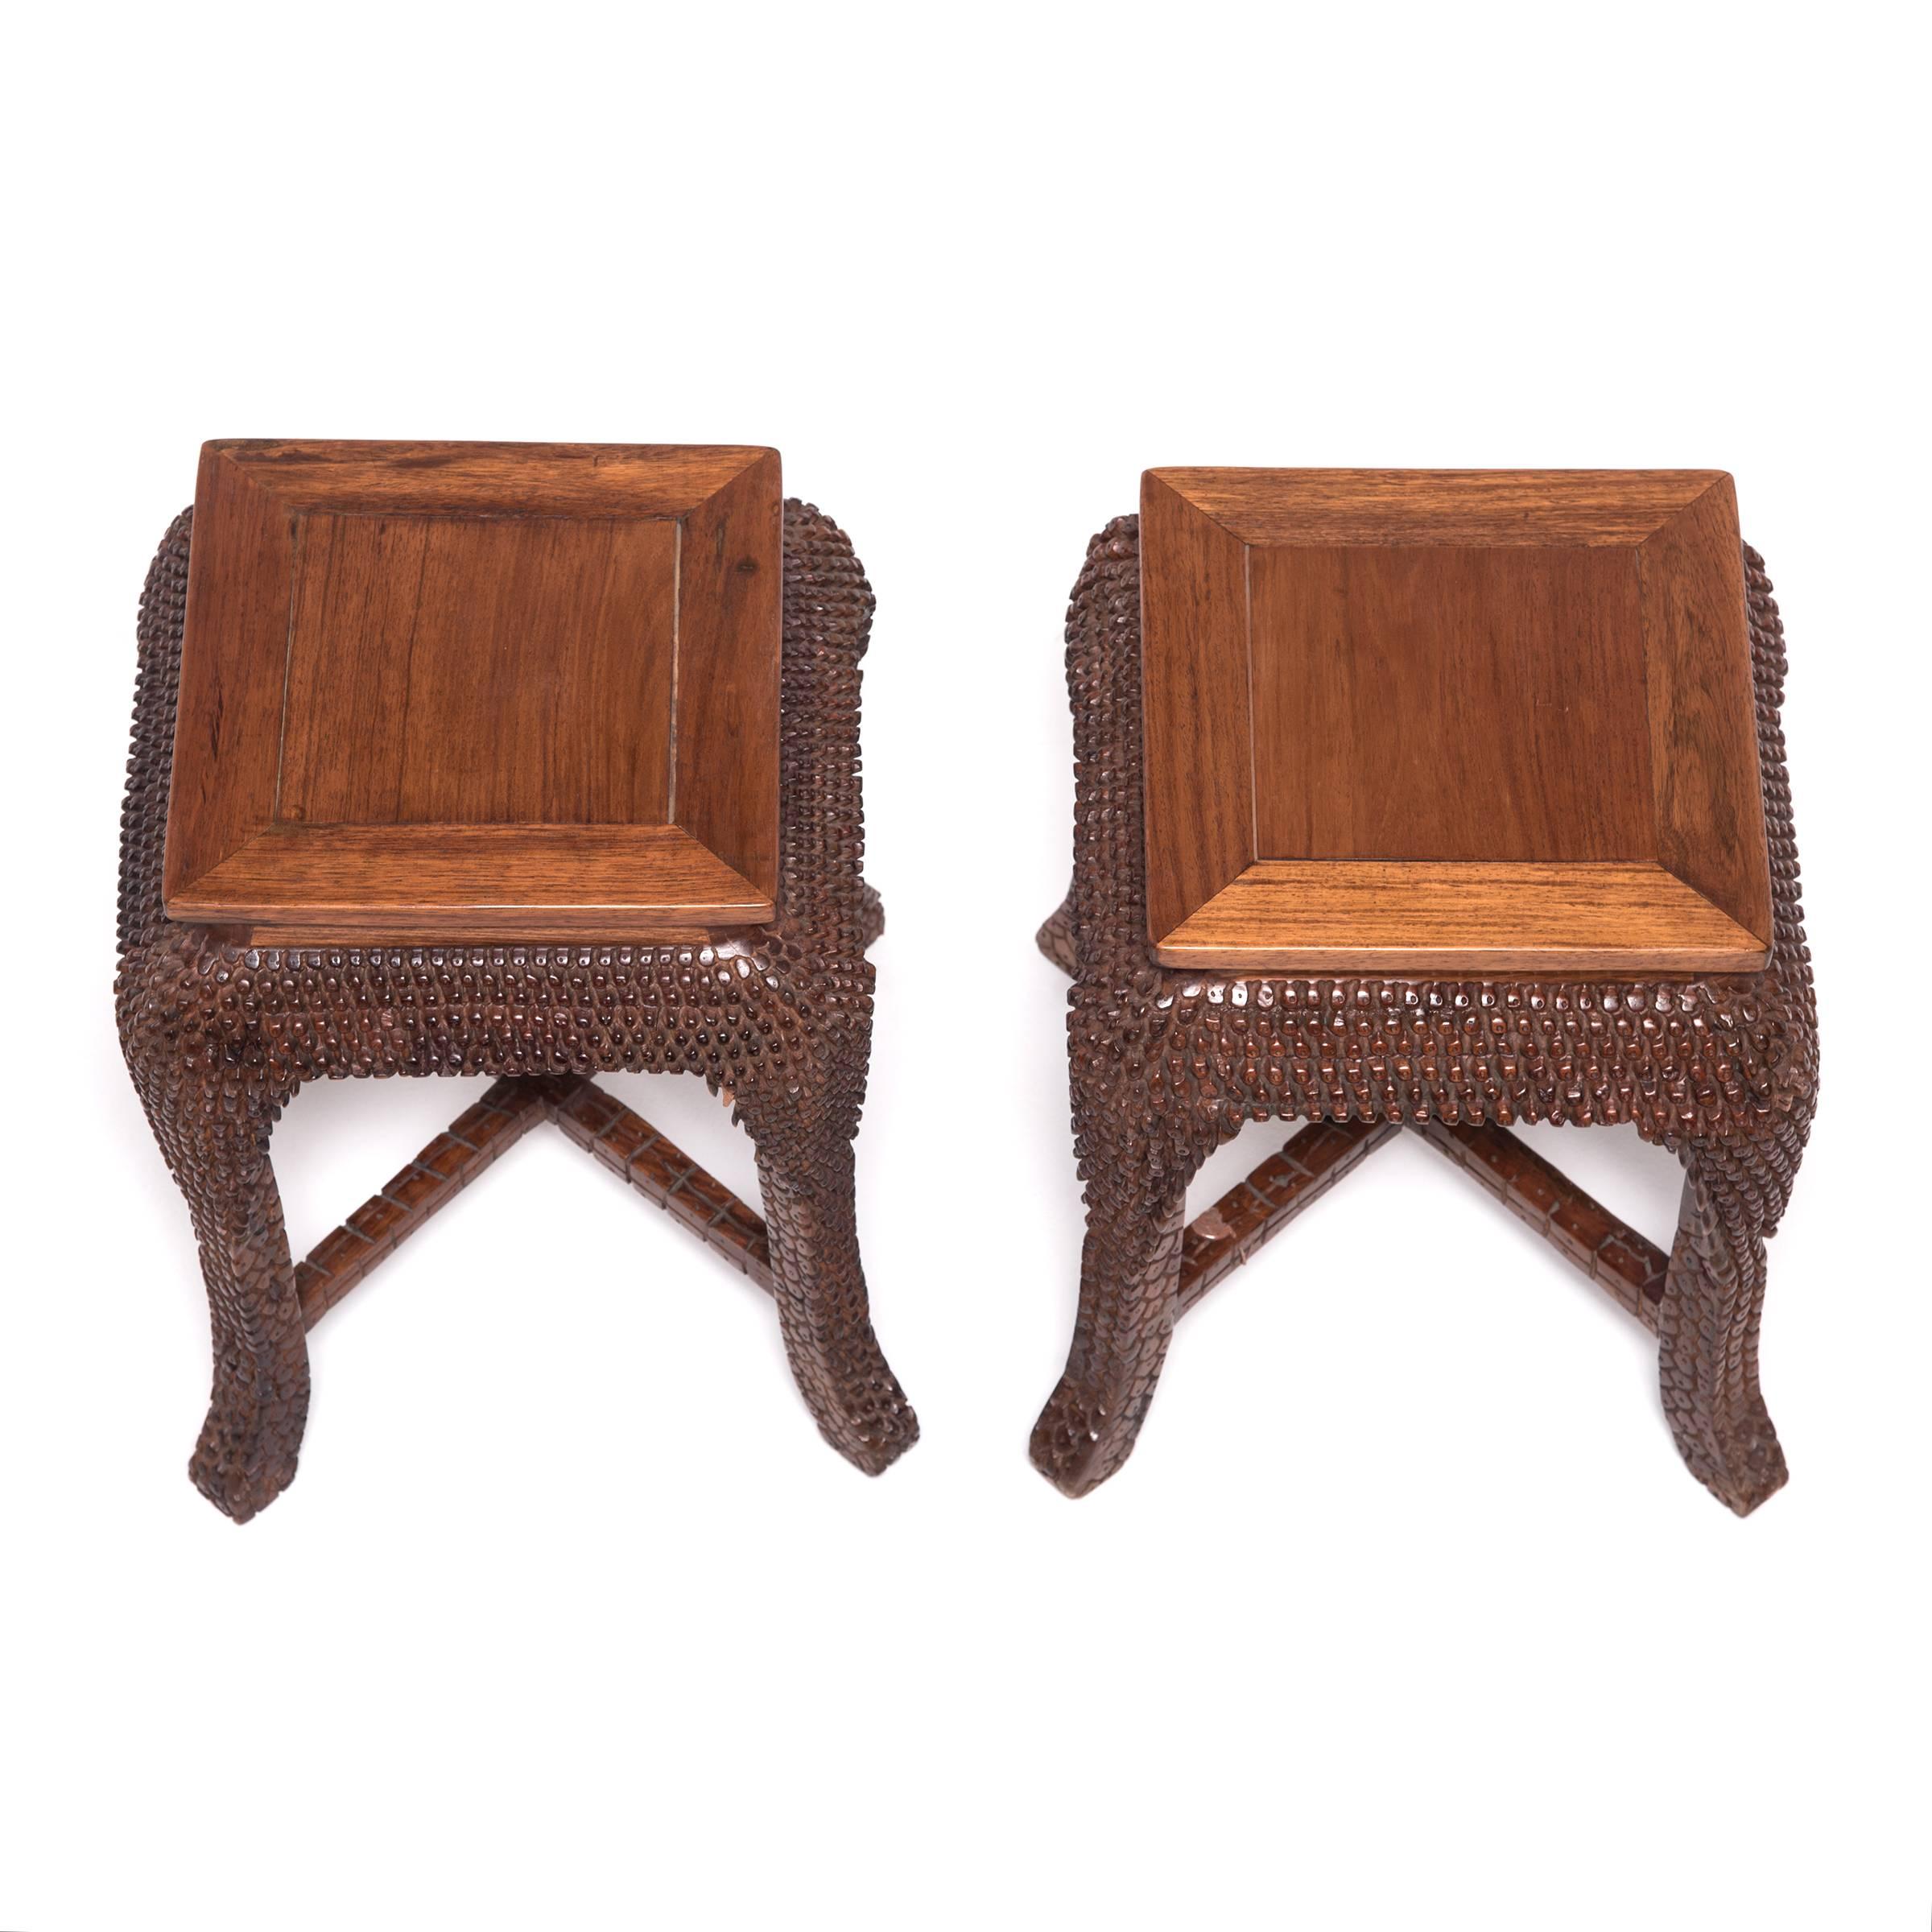 Chinese Dragon Scale Table Set with Square Stools, c. 1900 For Sale 2